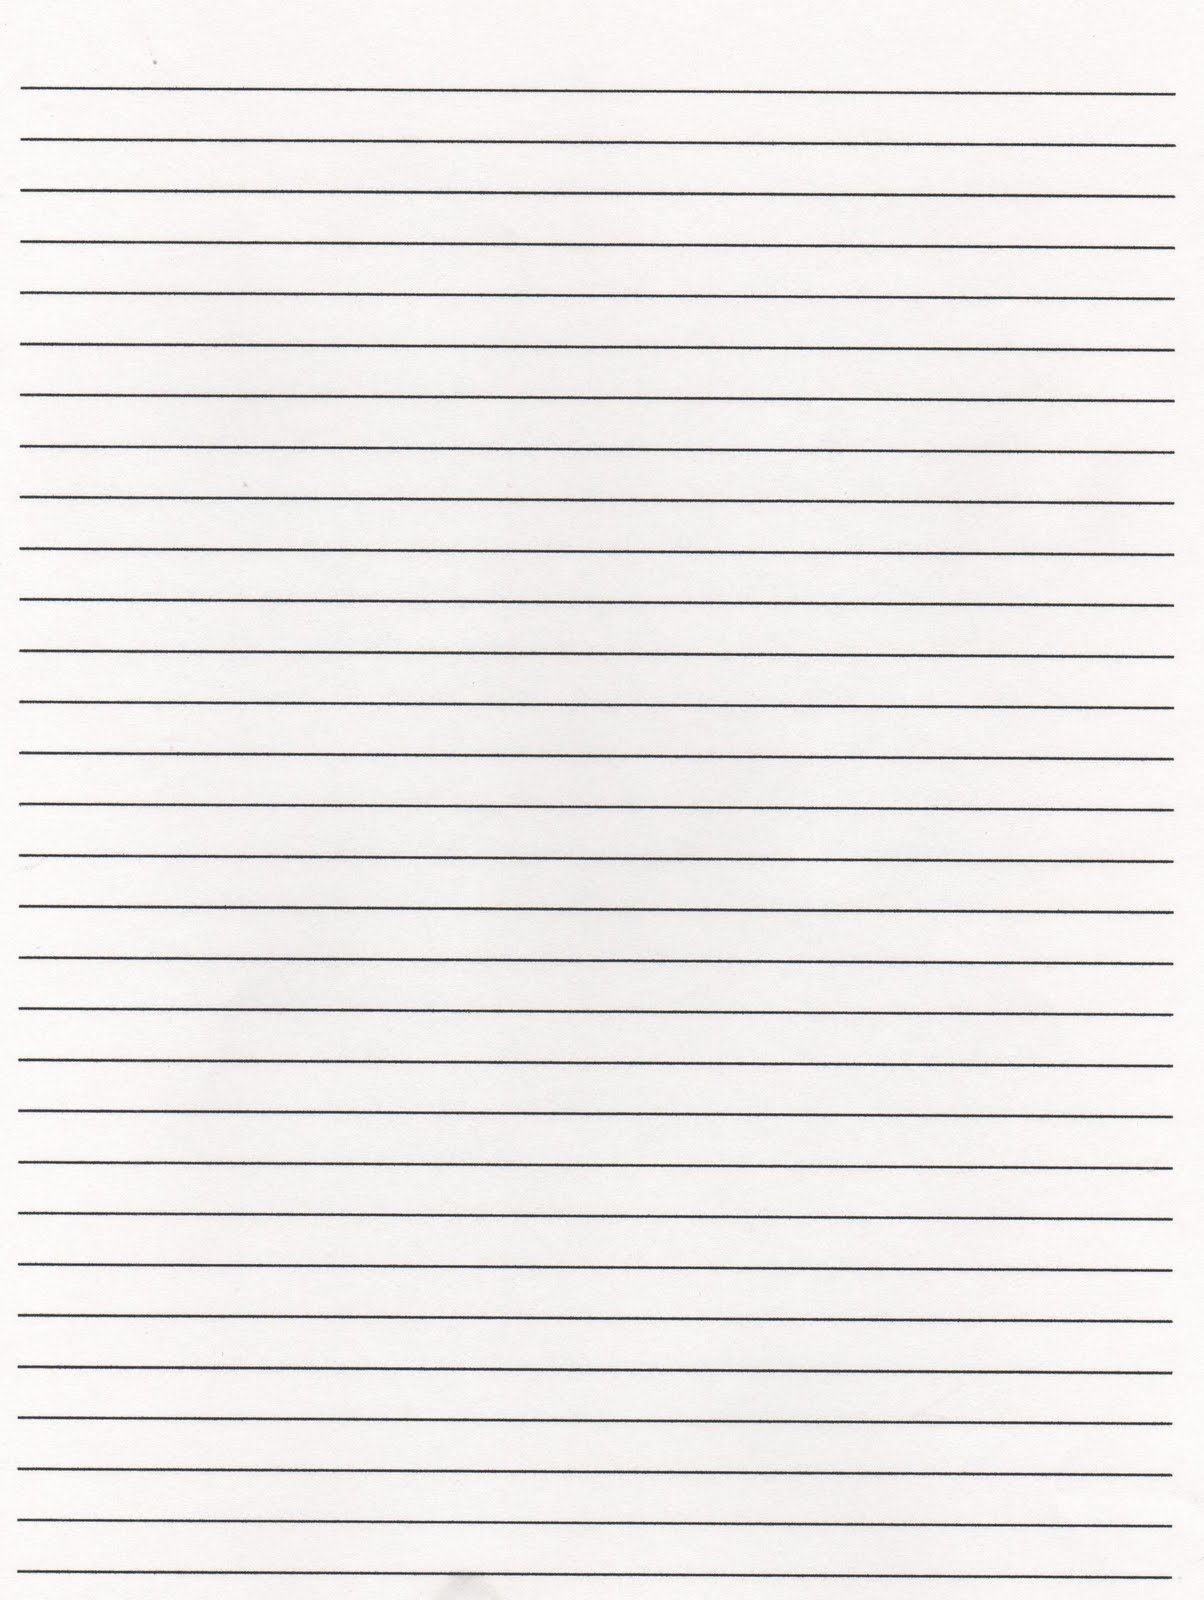 Lined Writing Paper 2